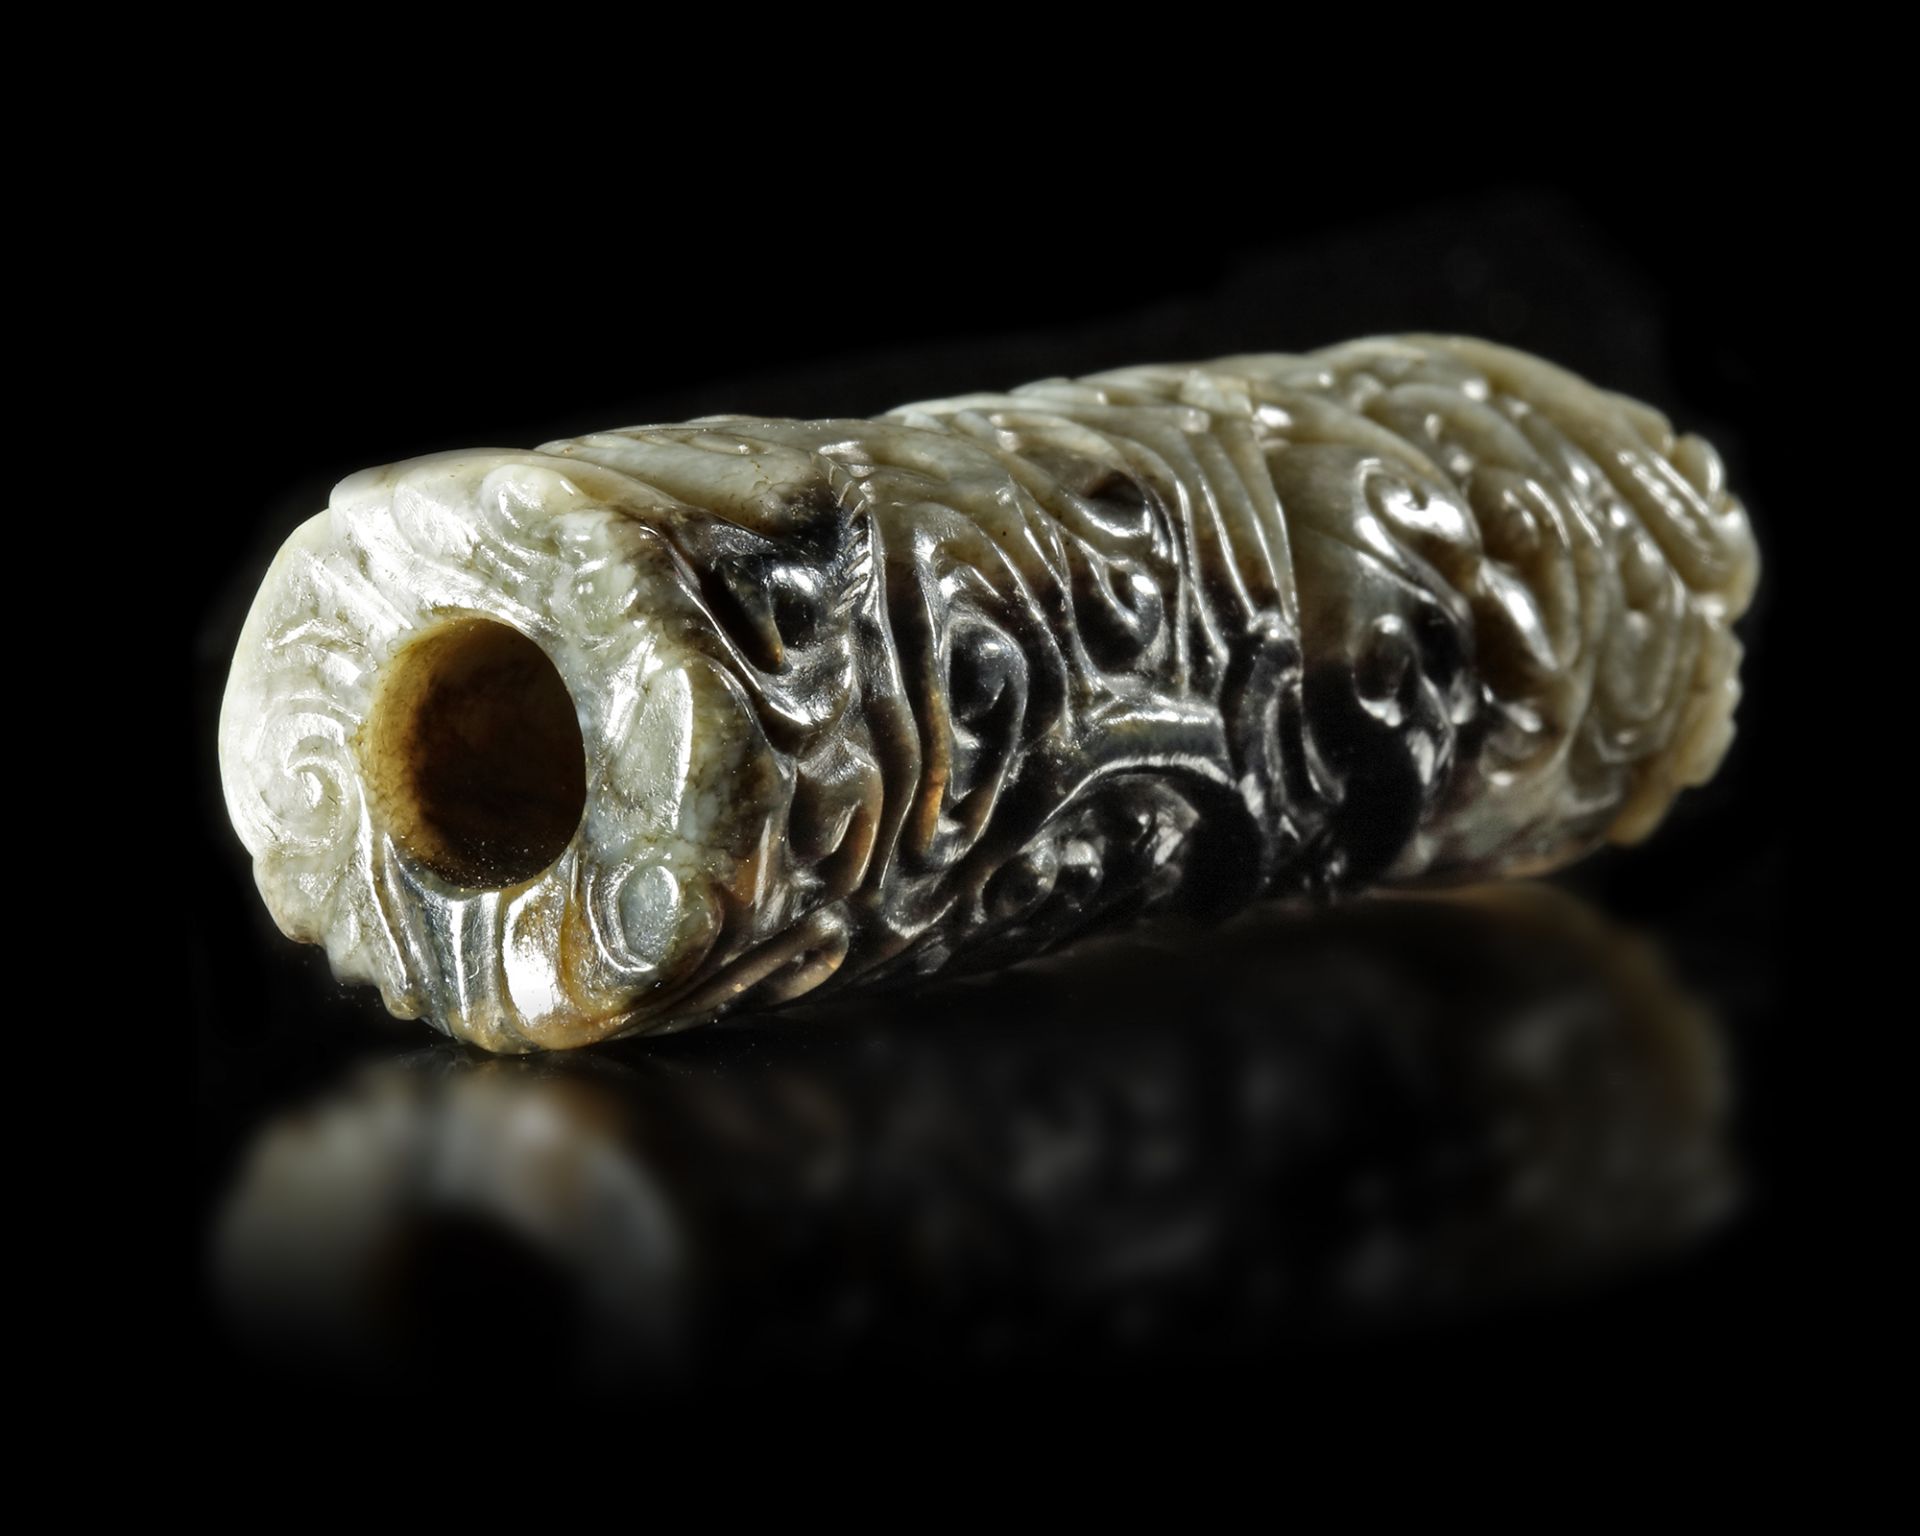 A CHINESE CARVED JADE TUBE PENDANT, MING DYNASTY (1368-1644) - Image 3 of 4